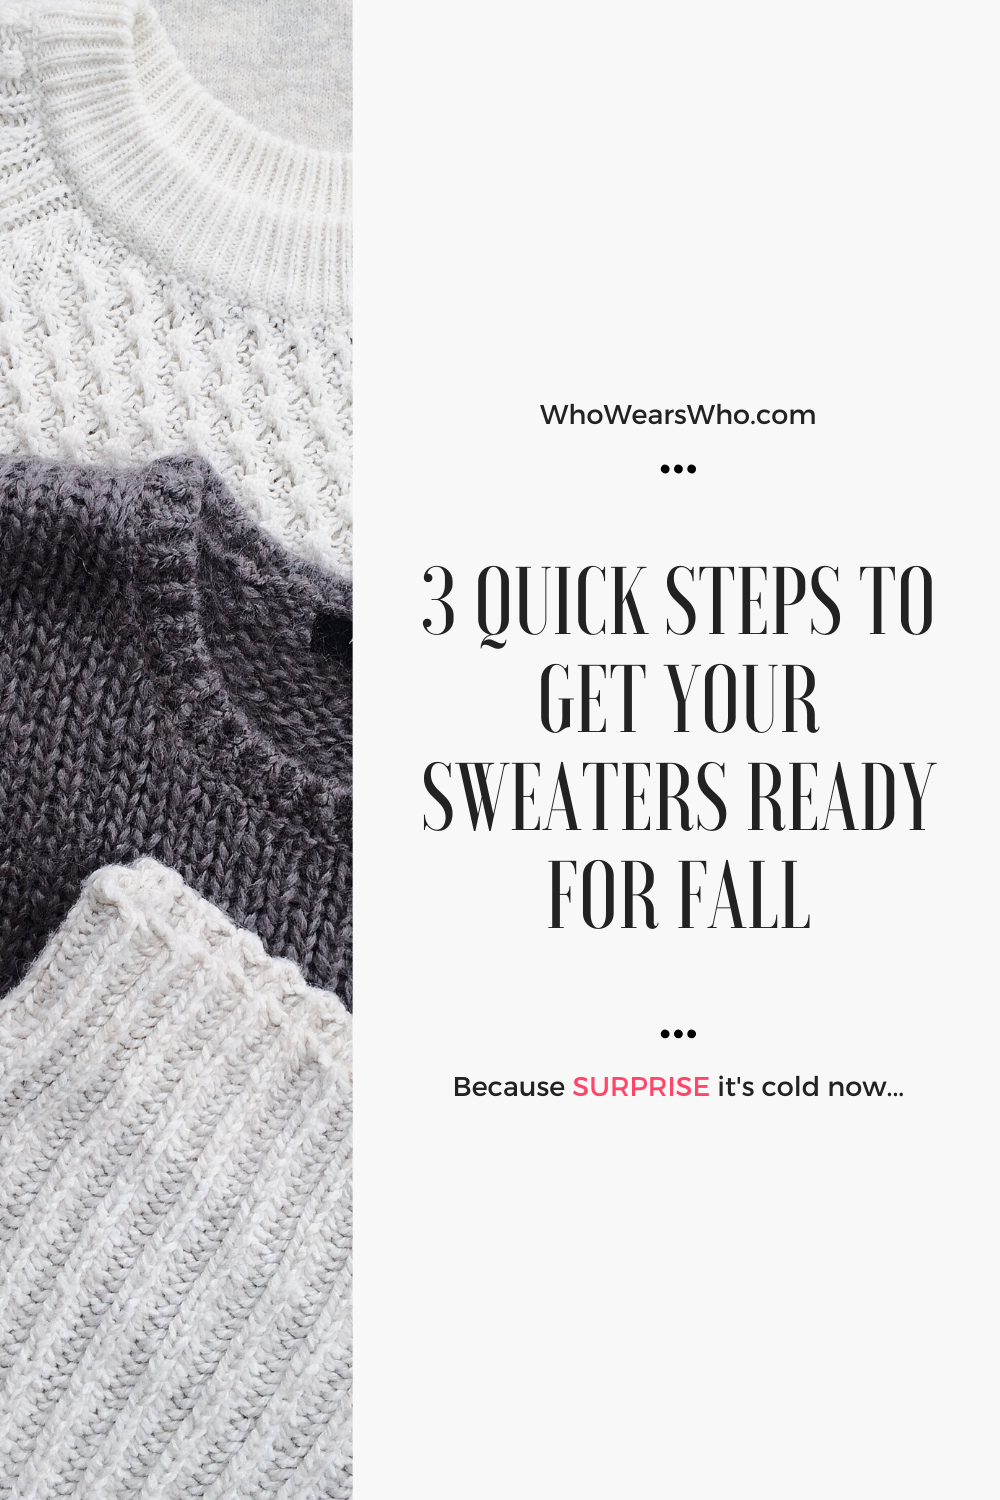 3 quick steps to get your sweaters ready for fall